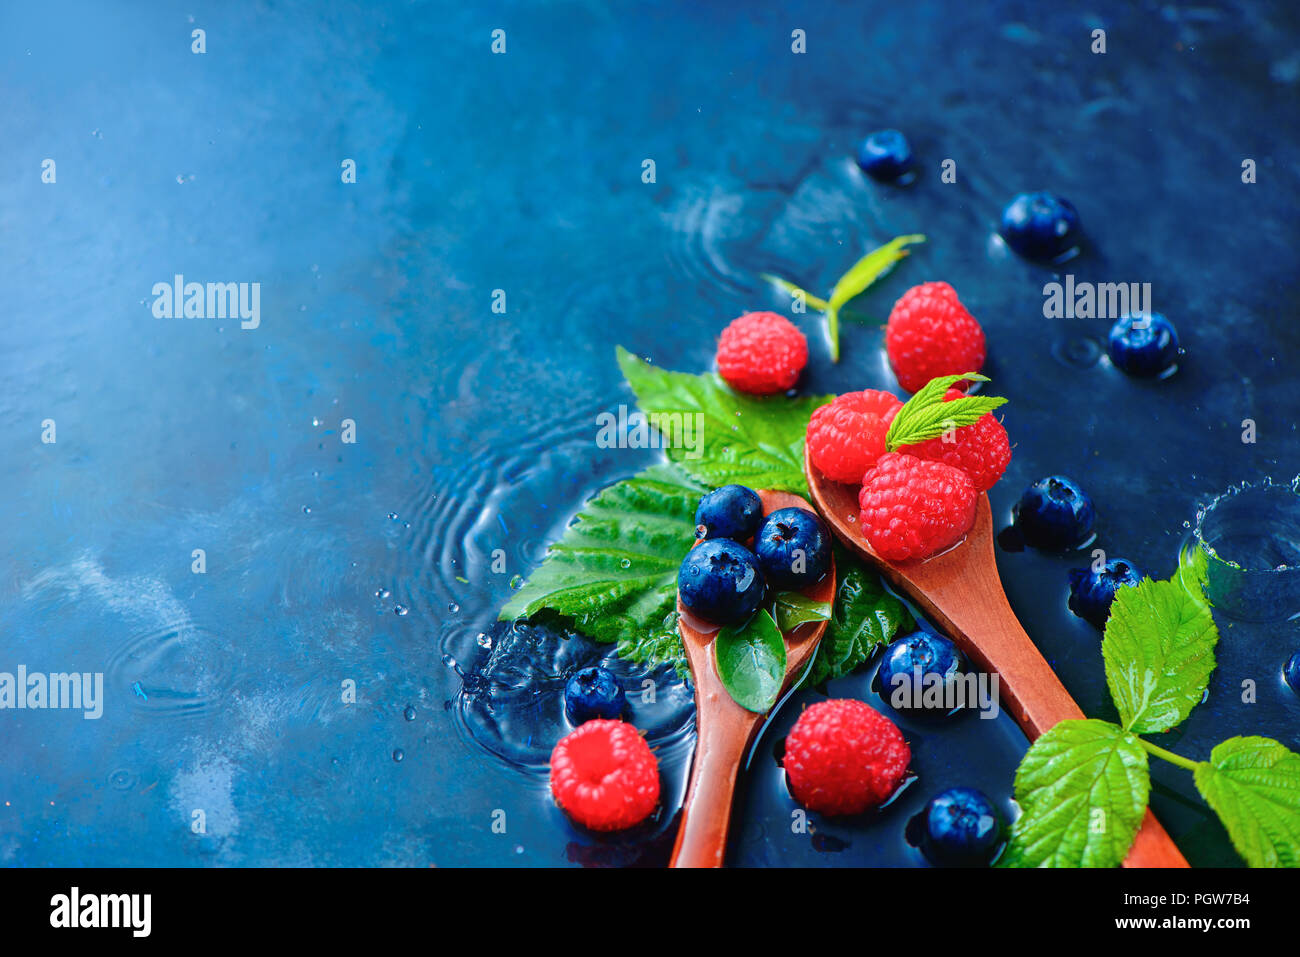 Summer berries in wooden spoons with raindrops. Raspberry and blueberry mix on a dark blue wet background with copy space. Raw ingredients concept Stock Photo